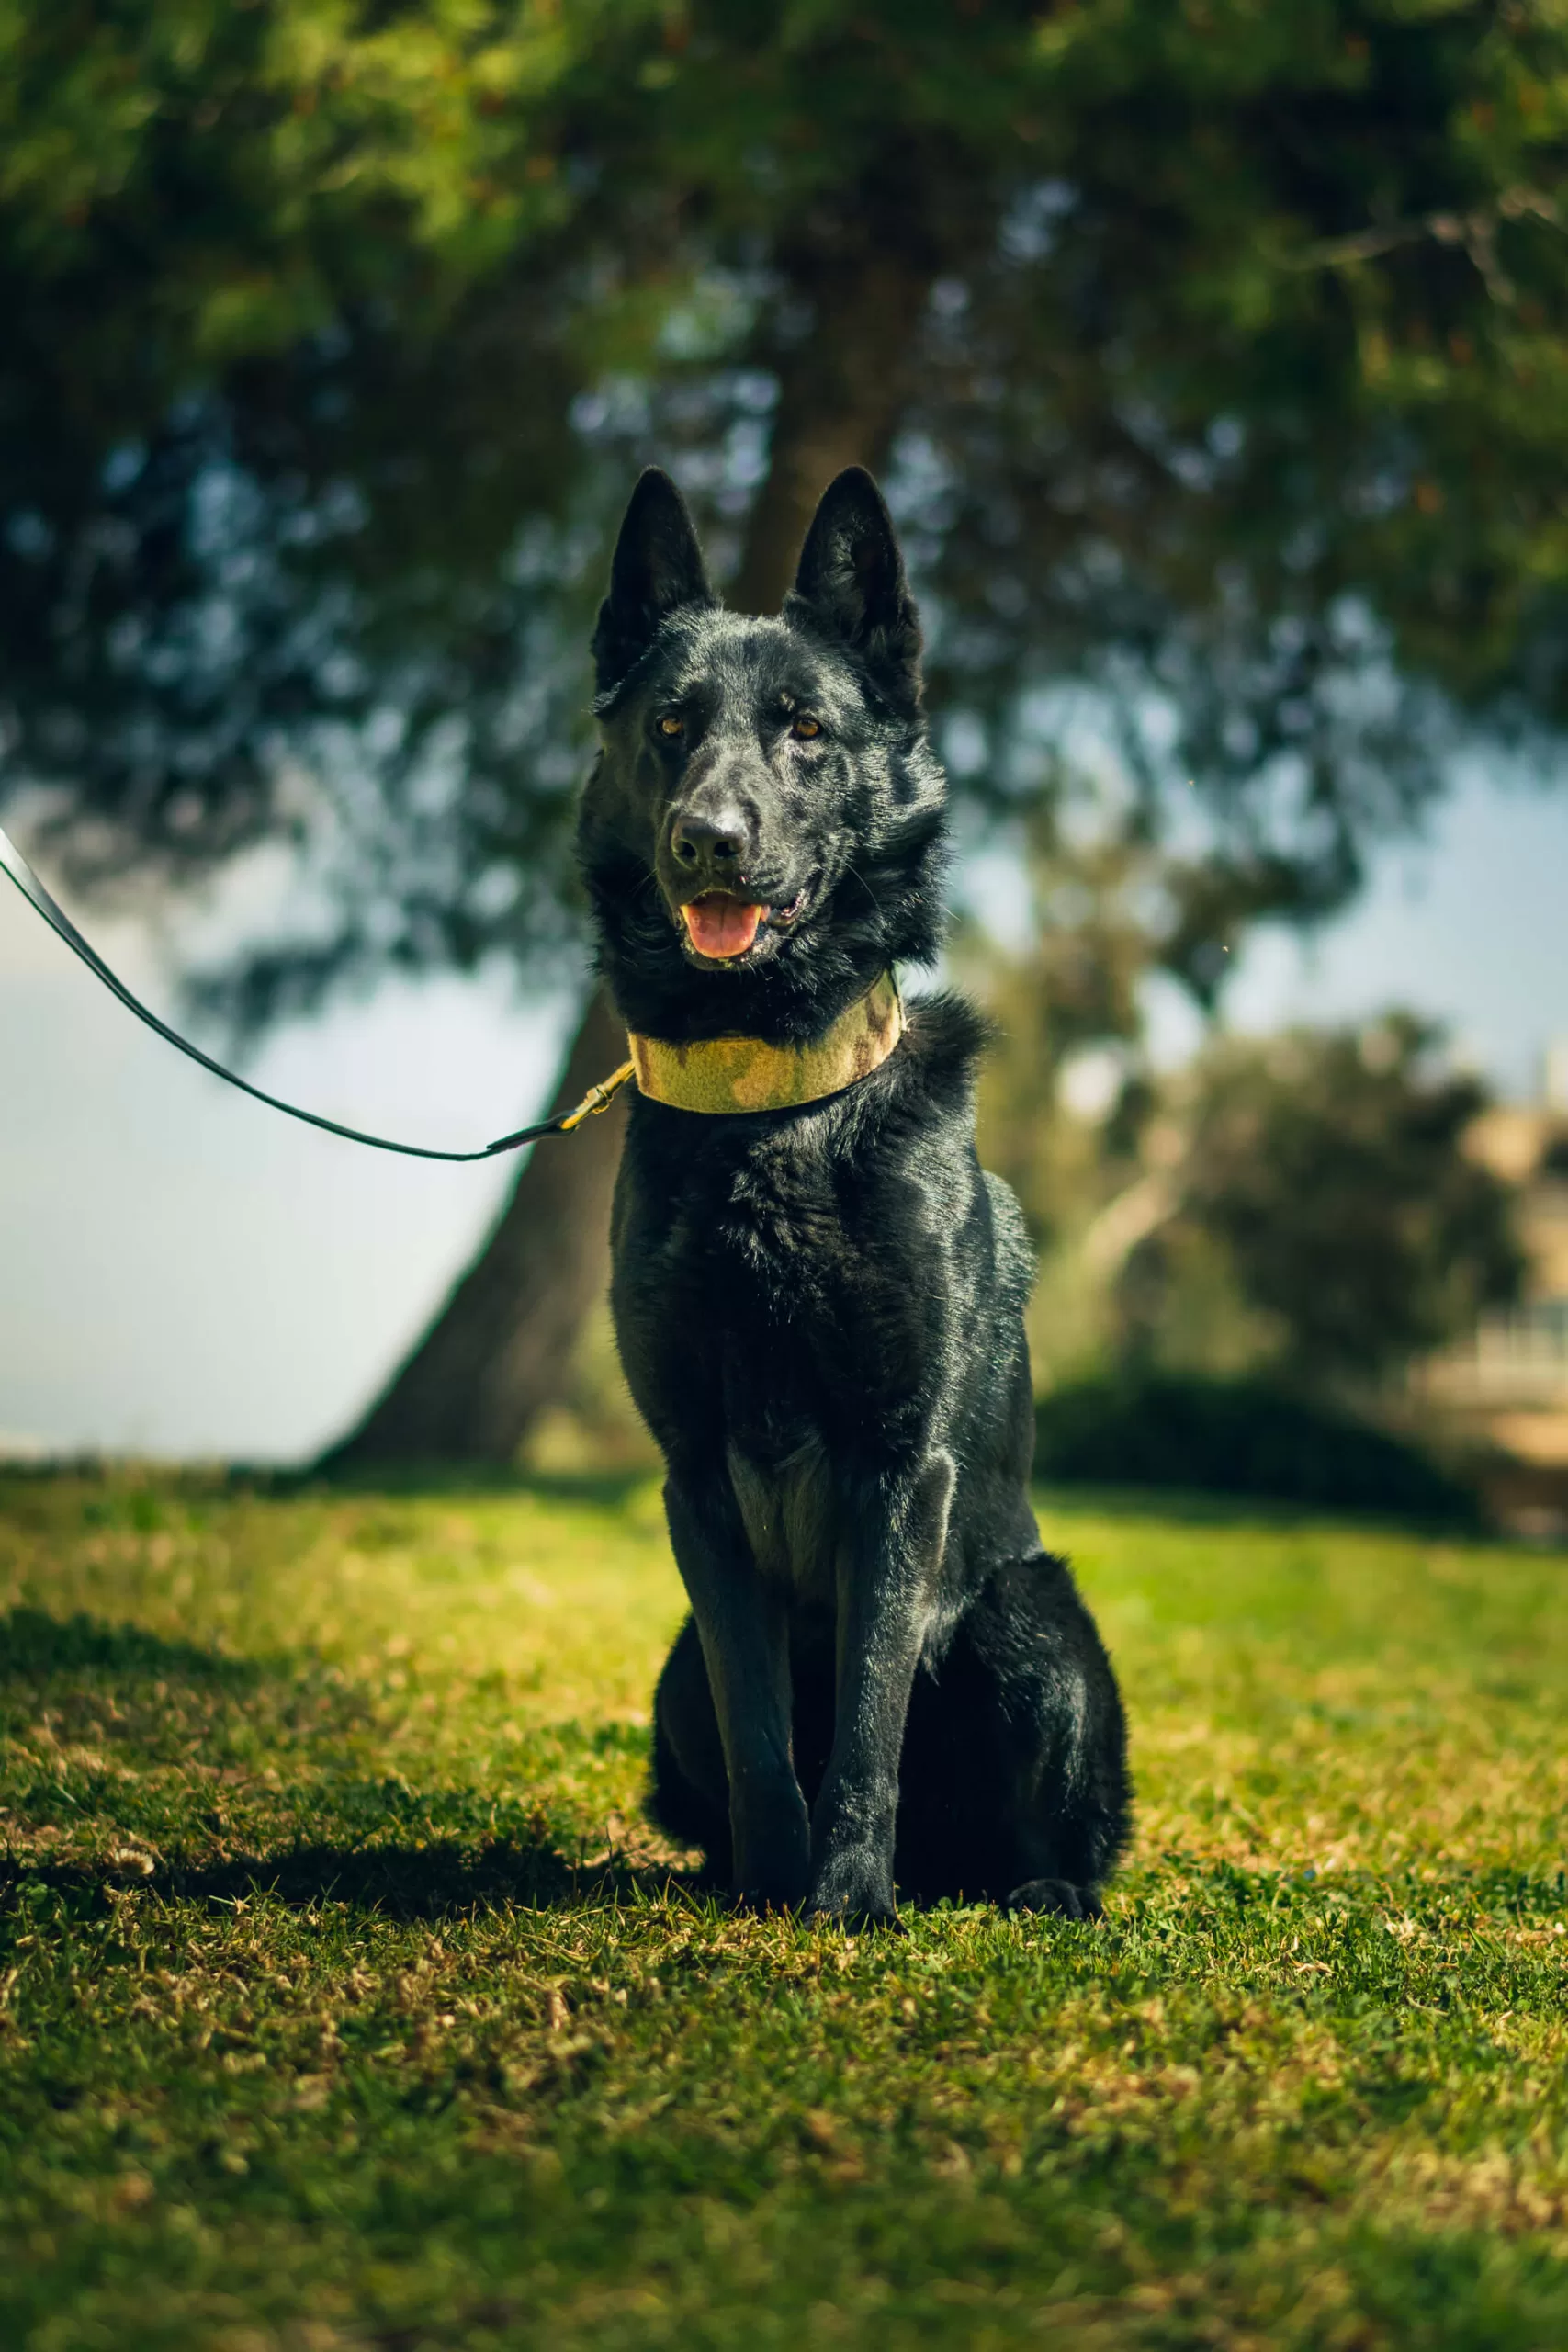 Israel K9 Protection|Home